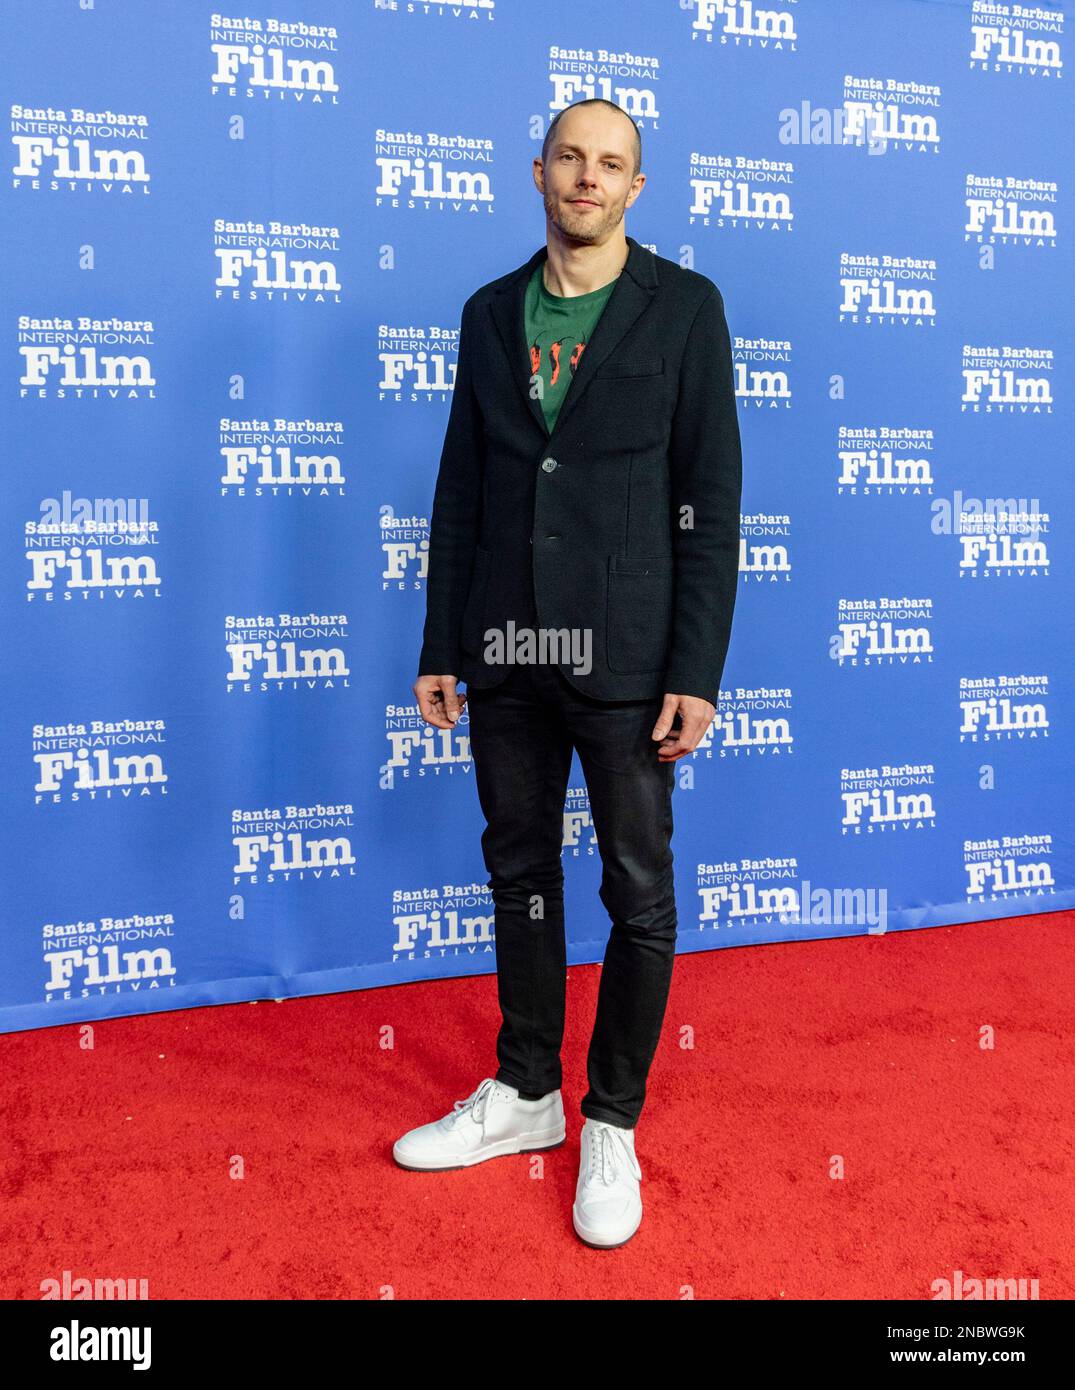 Markus Stemler – Sound Designer (All Quiet on the Western Front) arrives at the 2023 Santa Barbara International Film Festival red carpet event in receiving the Variety Artisans Award at the Arlington Theatre on February 13, 2023 in Santa Barbara, CA. (Photo by Rod Rolle/Sipa USA) Stock Photo